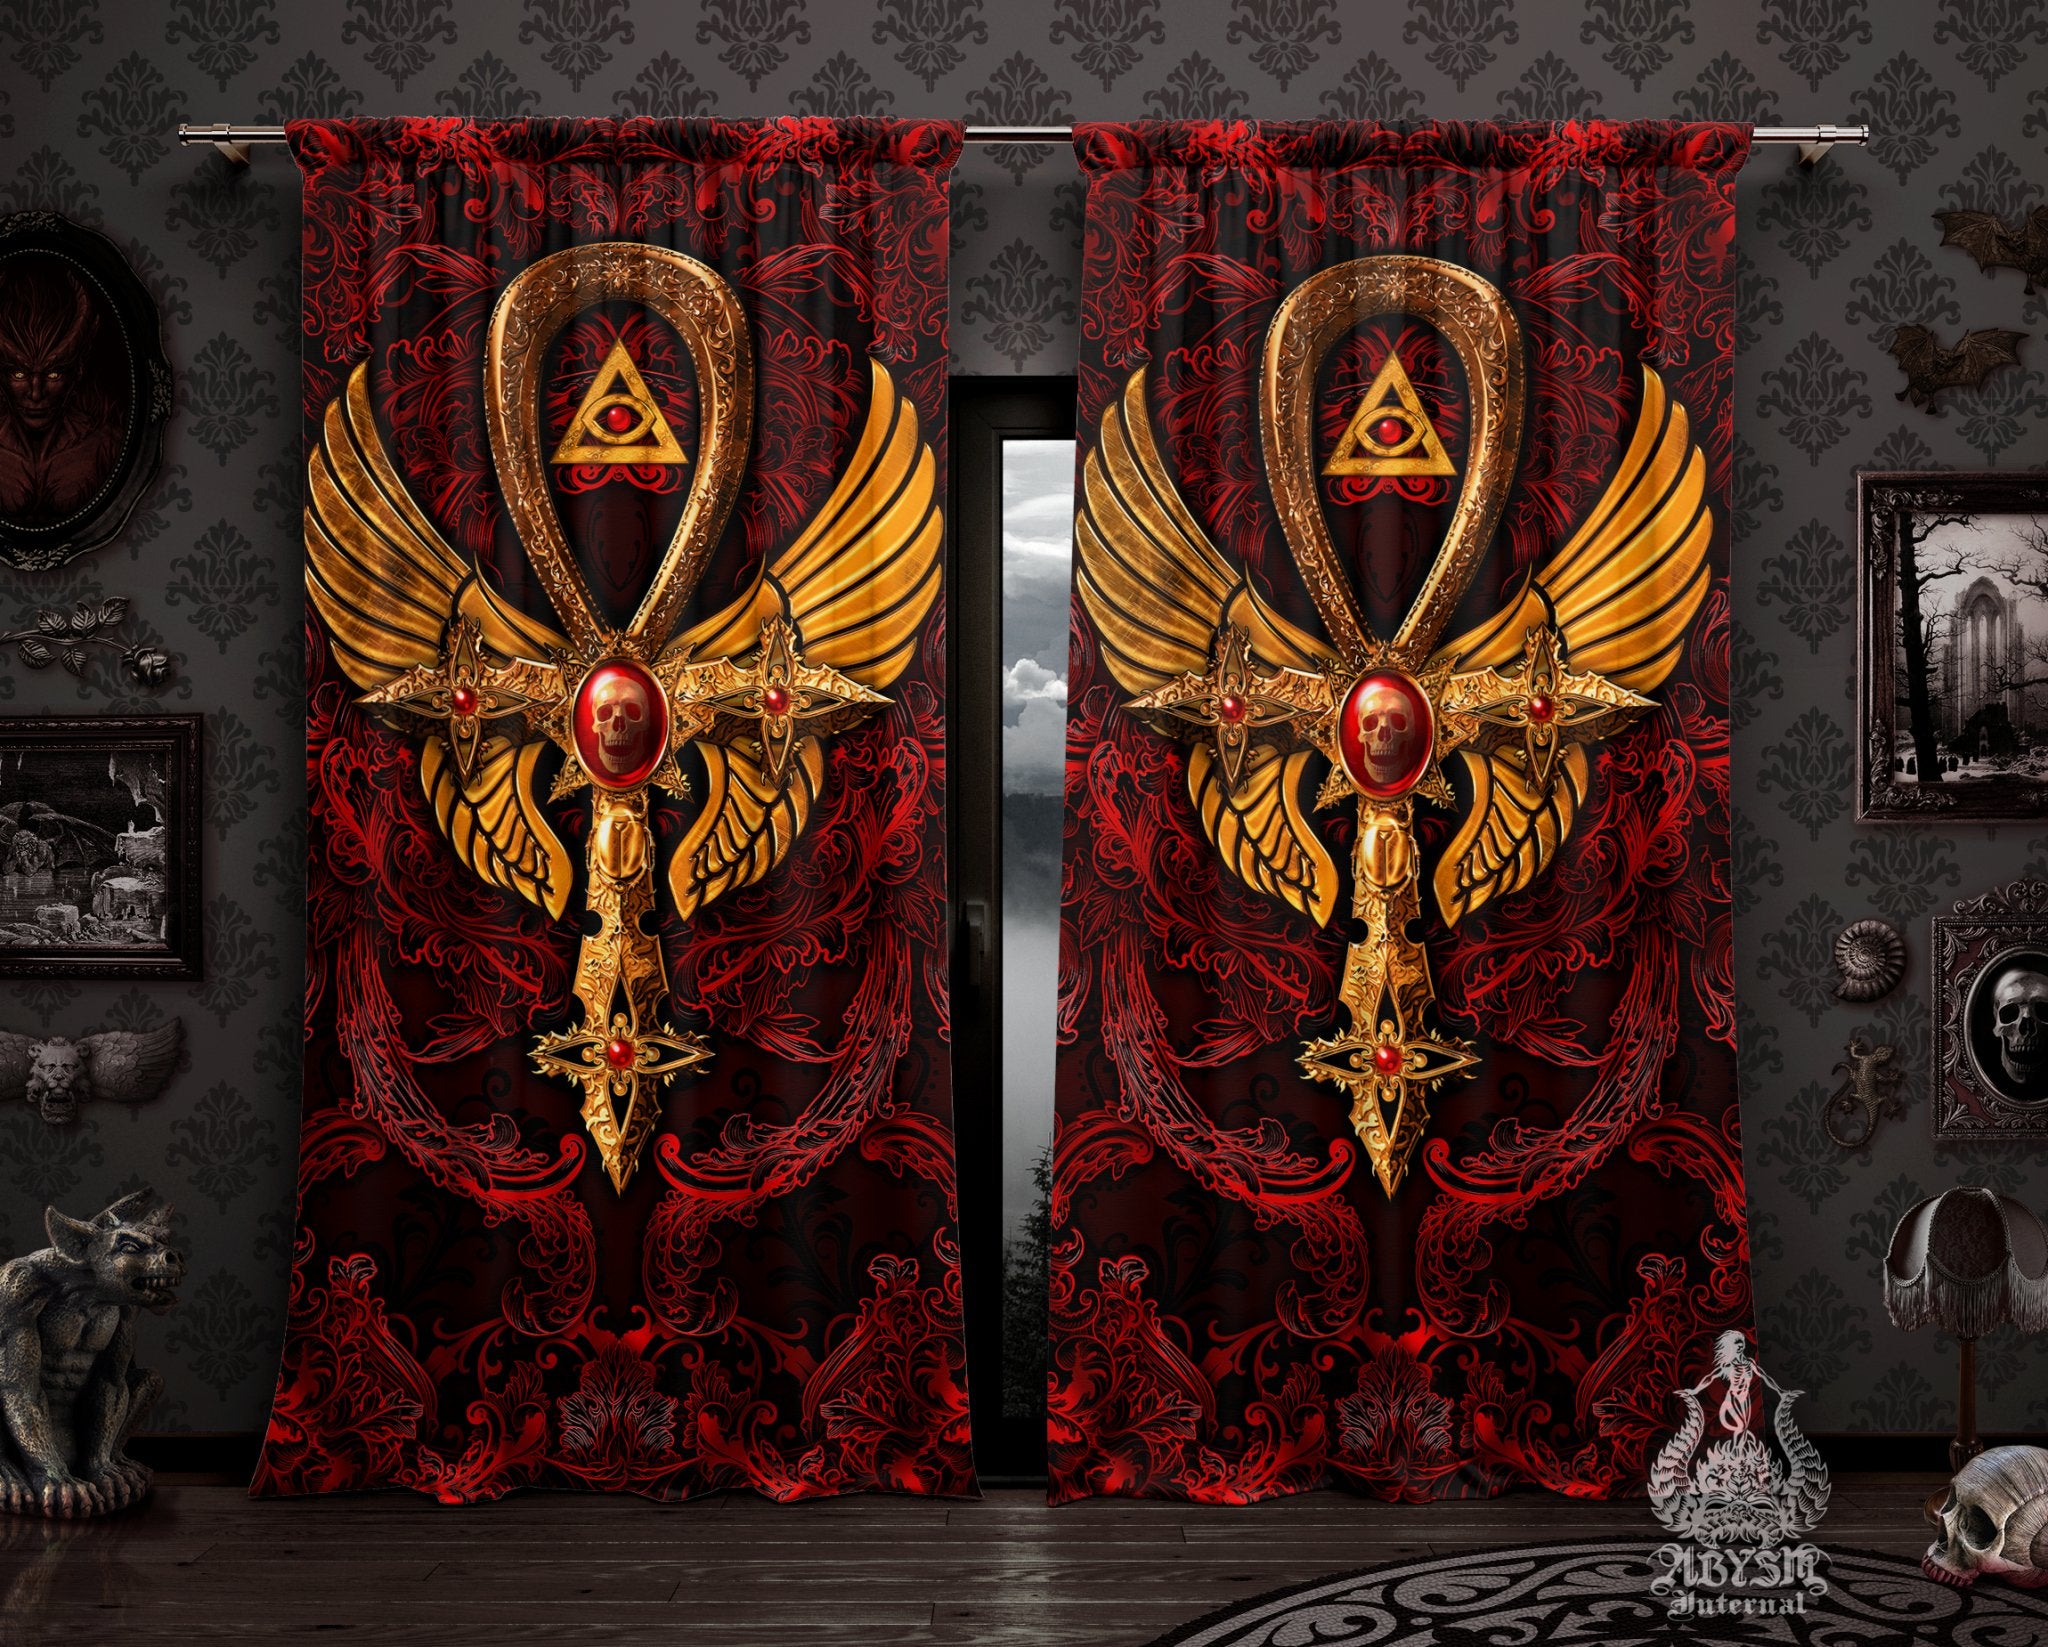 Bloody Goth Curtains, 50x84' Printed Window Panels, Gothic Home Decor, Art Print - Ankh Cross, Dark Gold, Red and Black, 3 Colors - Abysm Internal